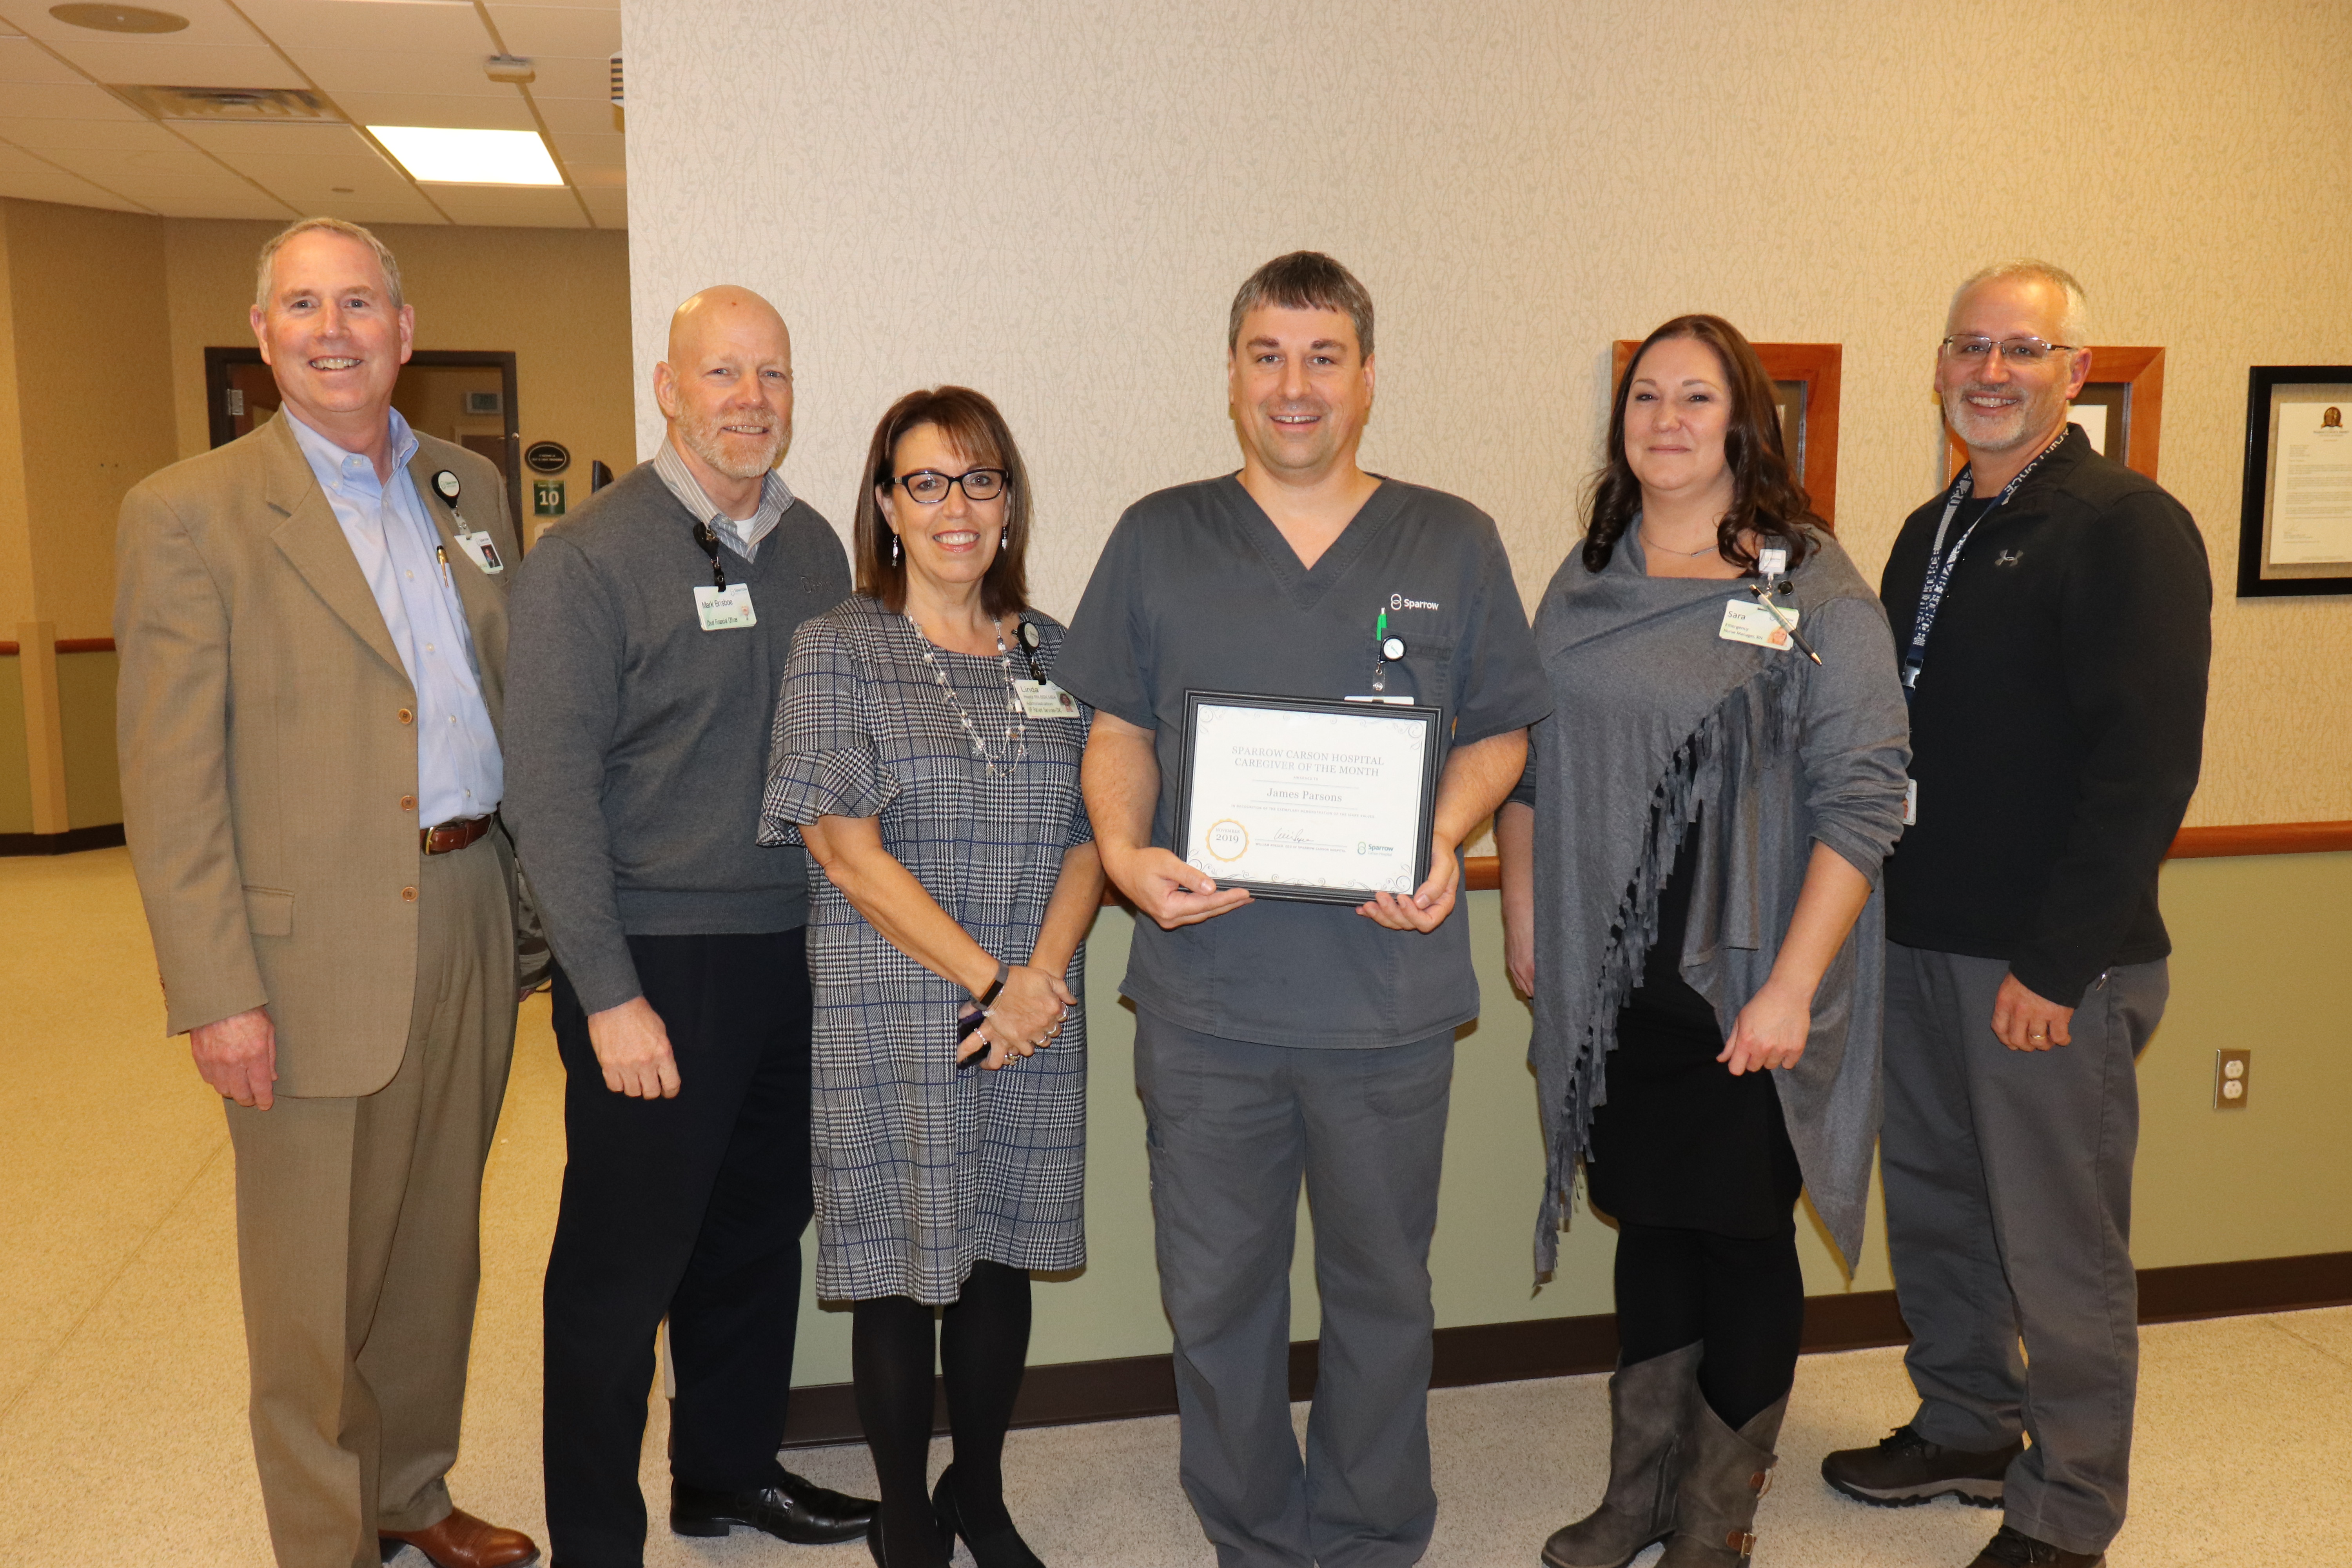 Photo caption: James Parsons, Emergency Department Paramedic (middle), received the Caregiver of the Month from Sparrow Carson Hospital Administrators Bill Roeser, President; Mark Brisboe, CFO; Linda Reetz, interim CNO; Sara Hagerman, Emergency Department Nurse Manager; and Monte Malek, Patient Care Services Director.